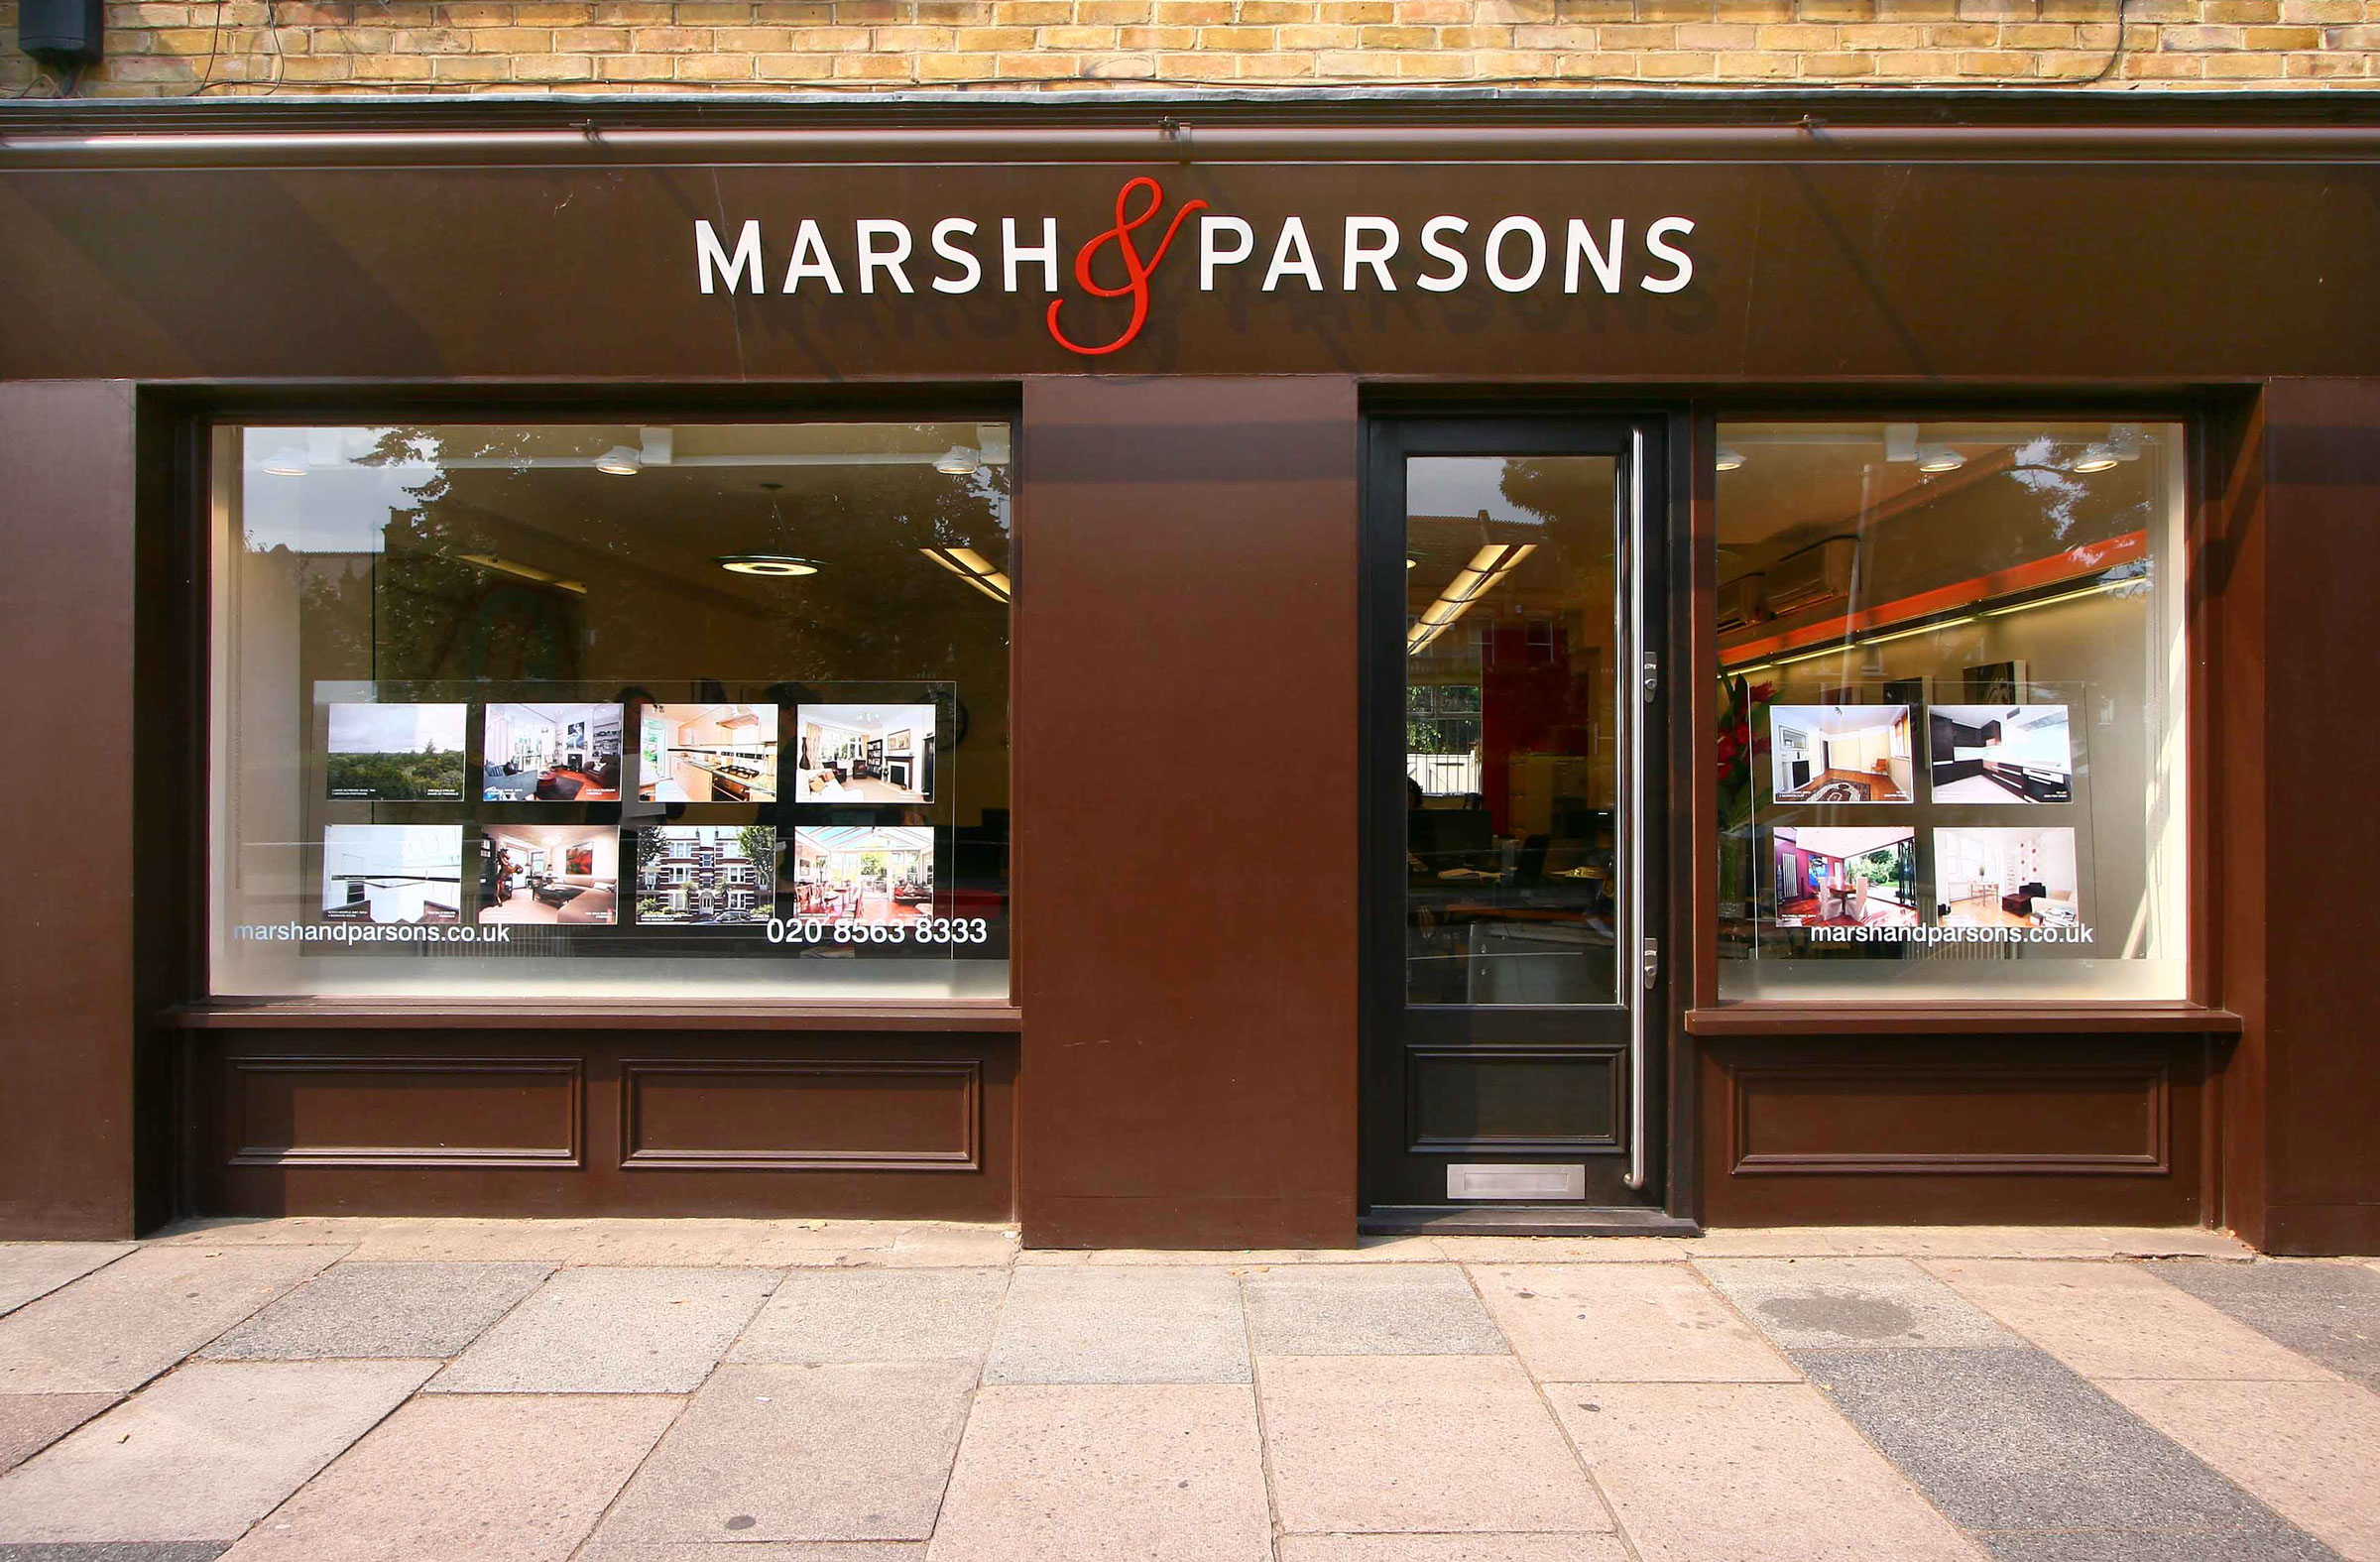 Marsh and Parsons London